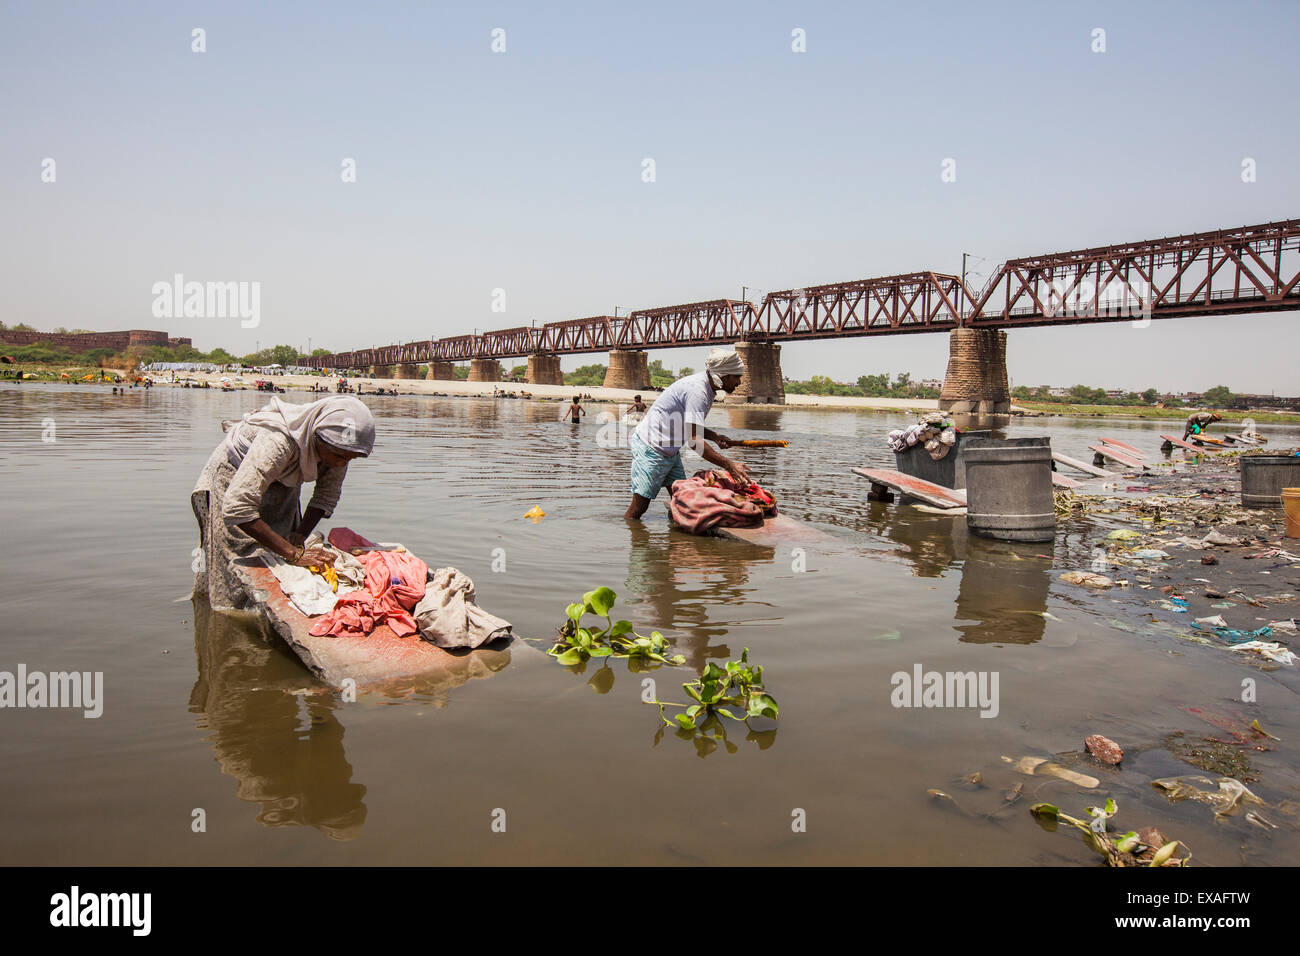 Women wash clothes in the polluted water of the Yamuna River, a tributary of the Ganges, New Delhi, India, Asia Stock Photo